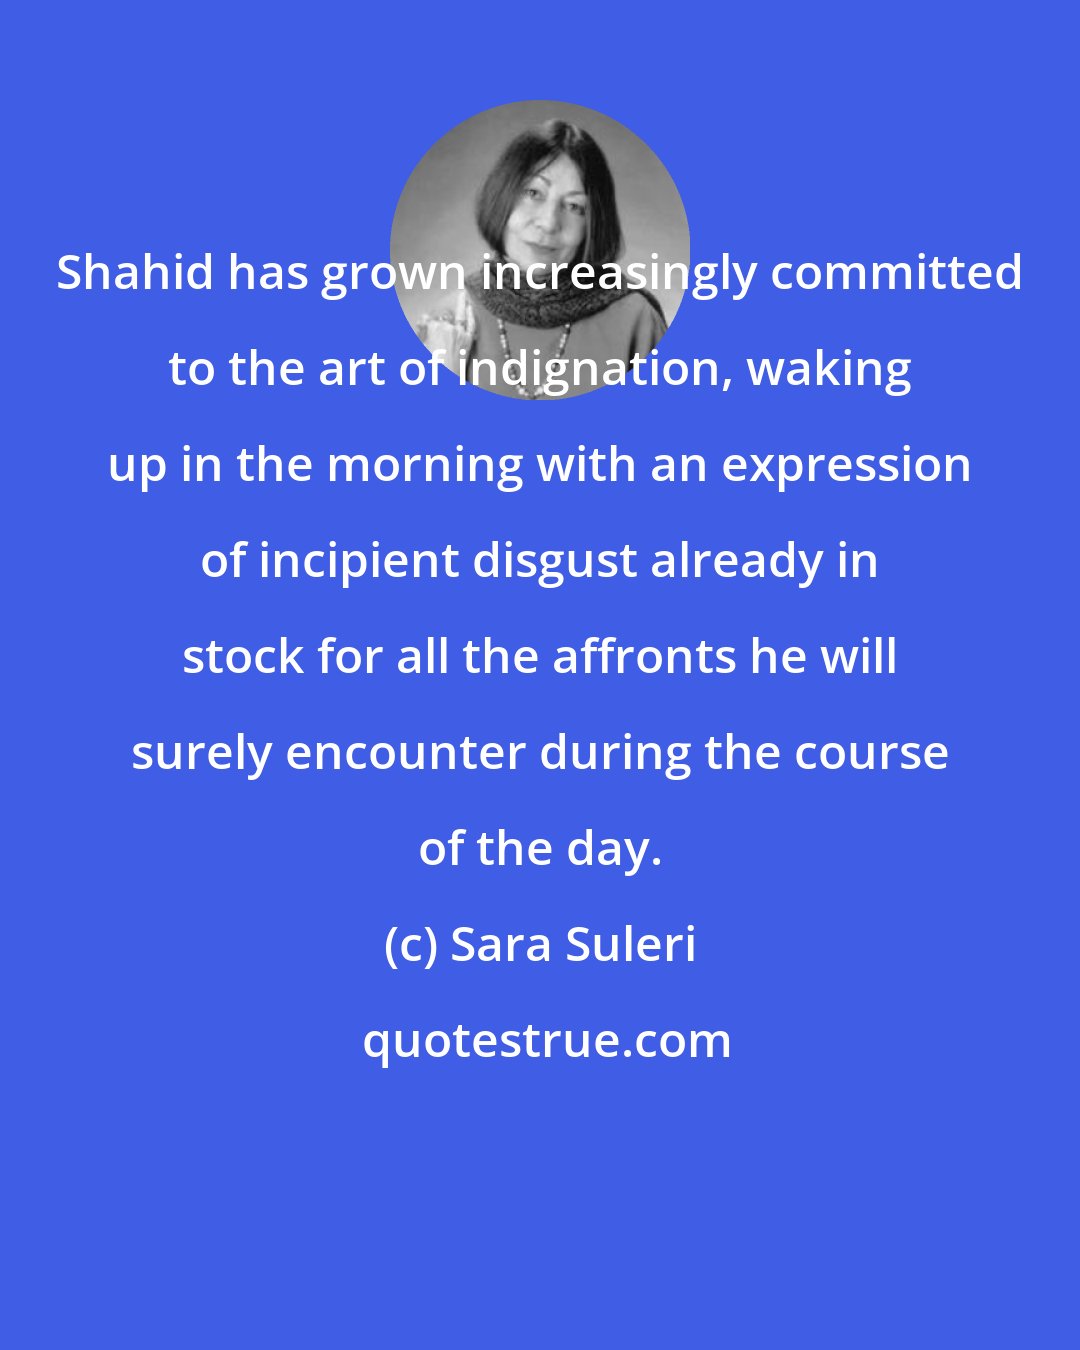 Sara Suleri: Shahid has grown increasingly committed to the art of indignation, waking up in the morning with an expression of incipient disgust already in stock for all the affronts he will surely encounter during the course of the day.